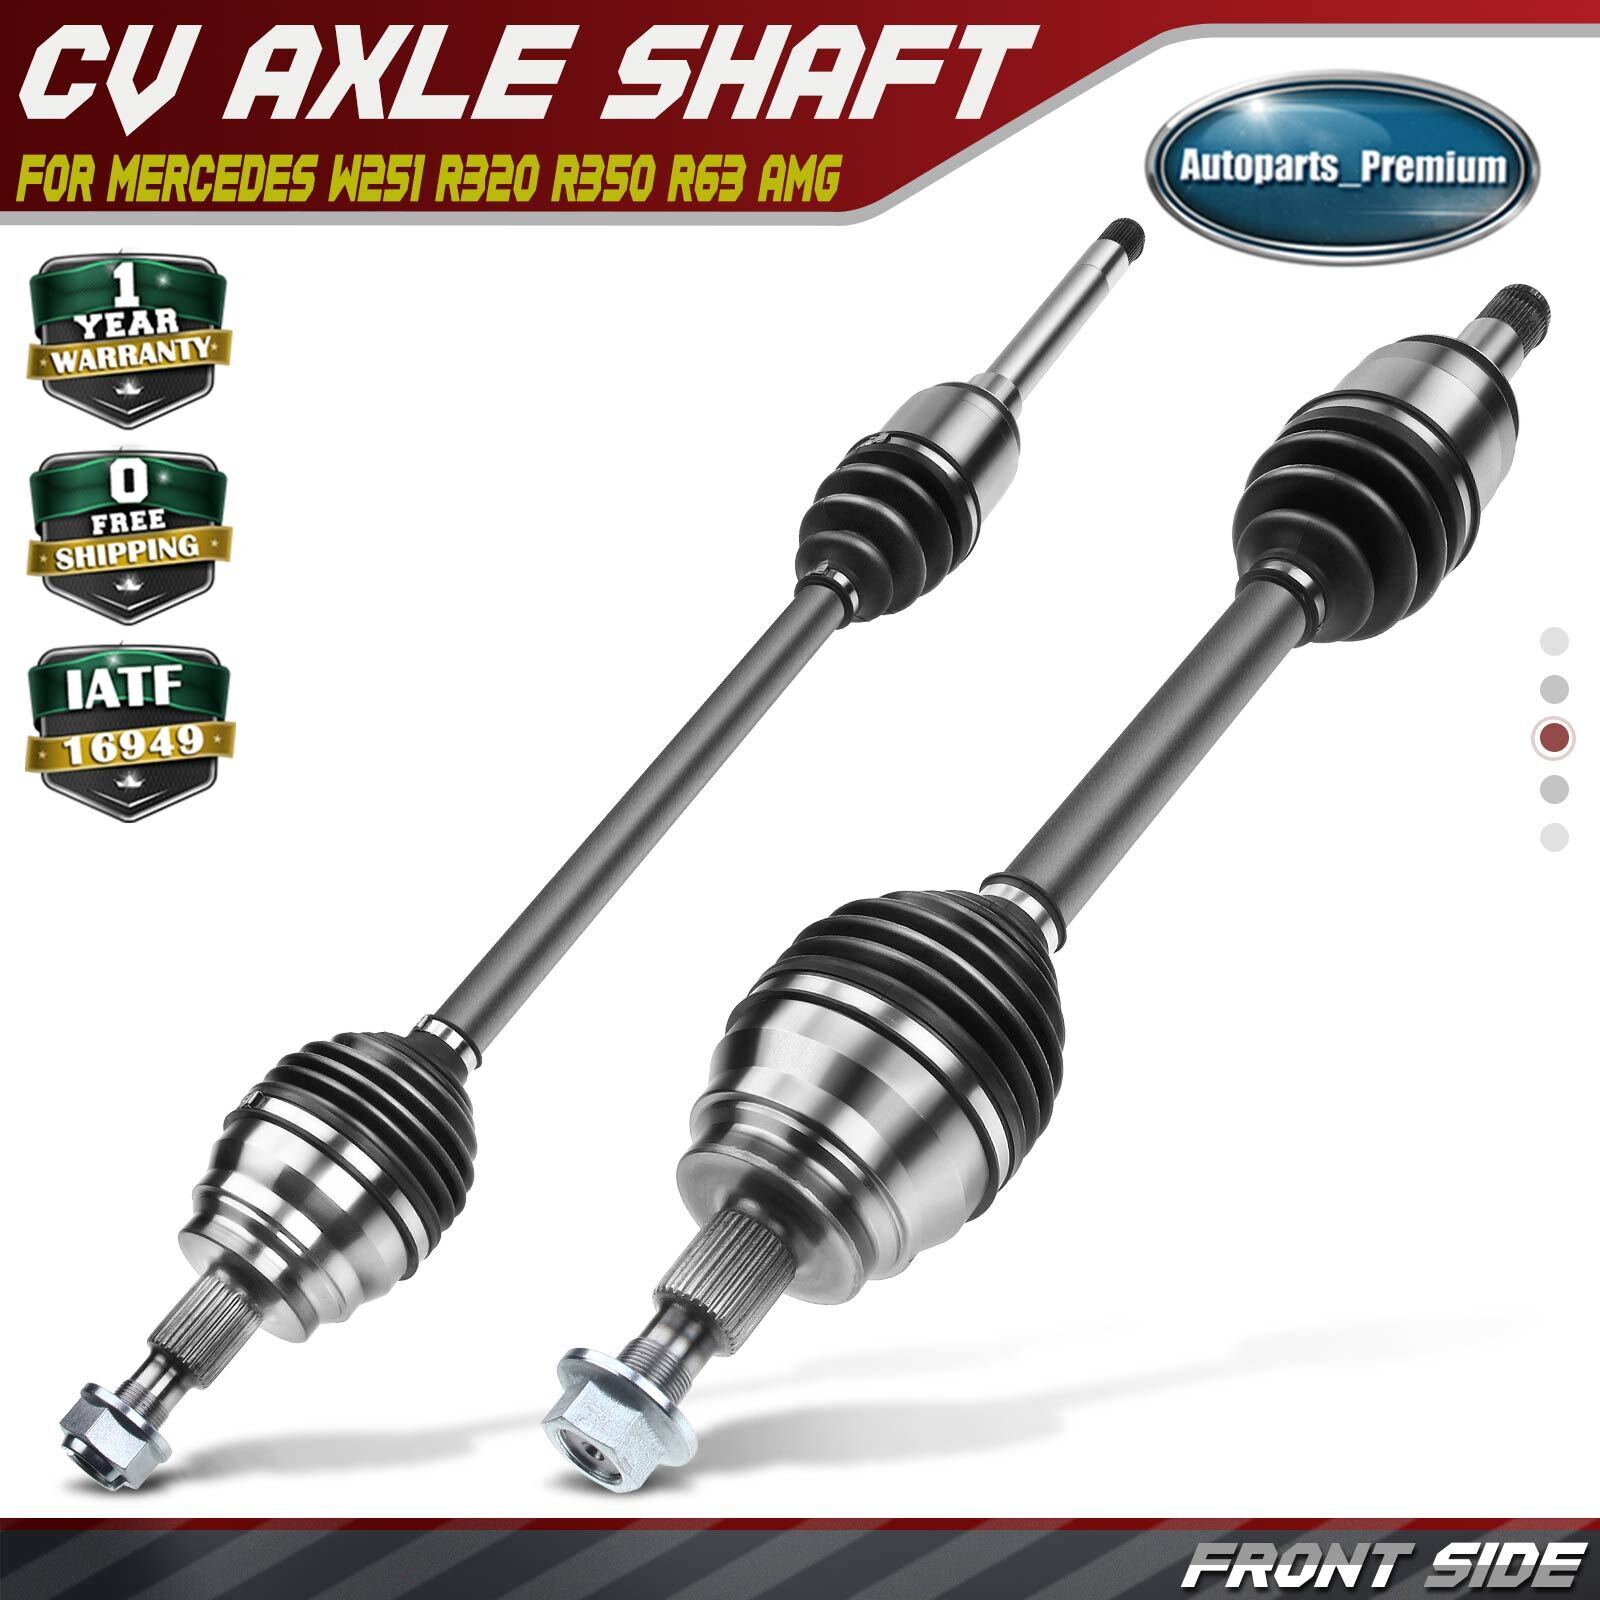 2x Front CV Axle Assembly for Mercedes-Benz W251 R320 07-09 R350 R500 R63 AMG